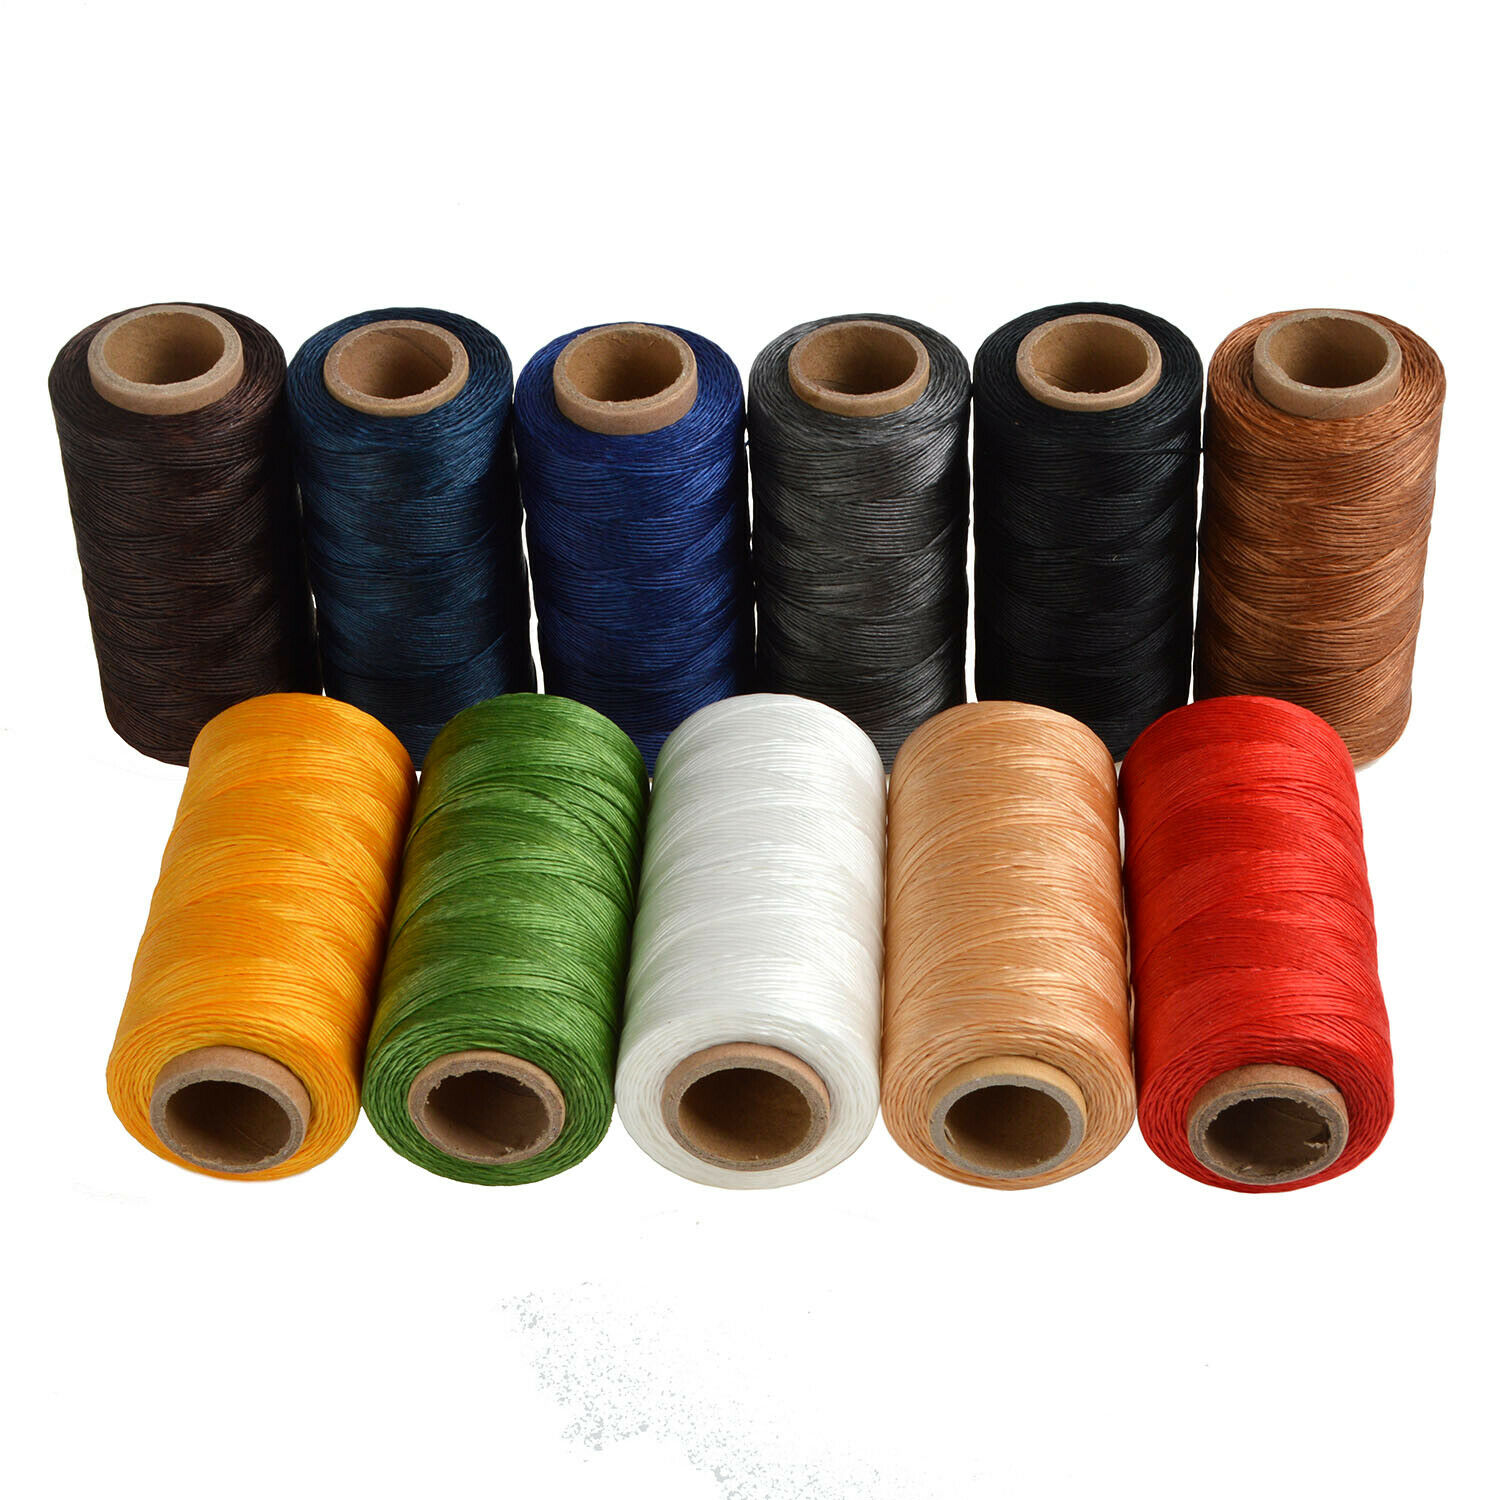 3000t 0.8mm 220m Spool Round Sewing Waxed Leather Threads Stitching Cord Craft